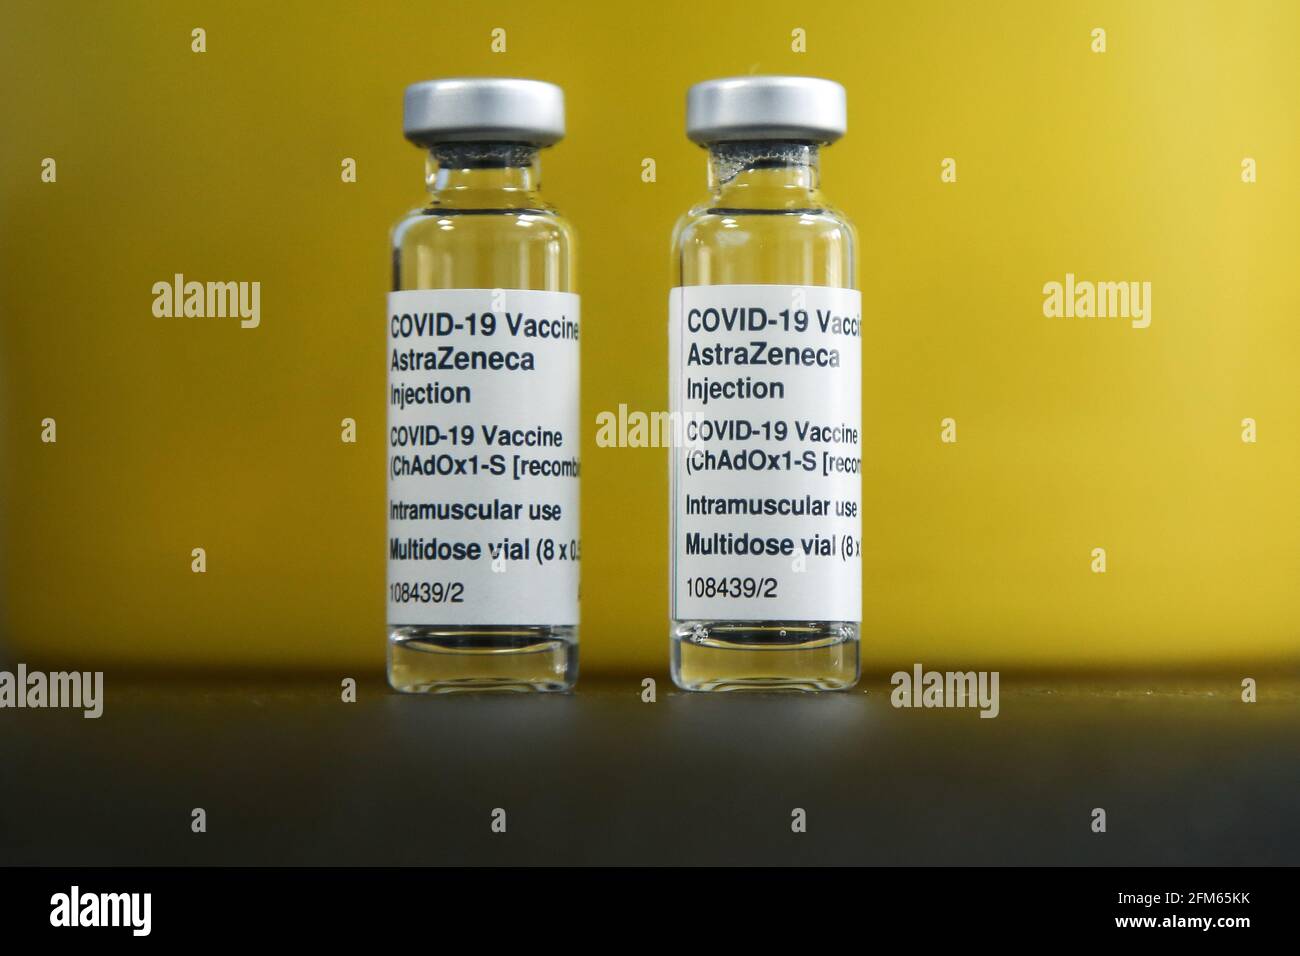 London, UK. 1st May, 2021. Vials containing the Oxford/AstraZeneca Covid-19 vaccine seen at a vaccination centre in London. Credit: Dinendra Haria/SOPA Images/ZUMA Wire/Alamy Live News Stock Photo